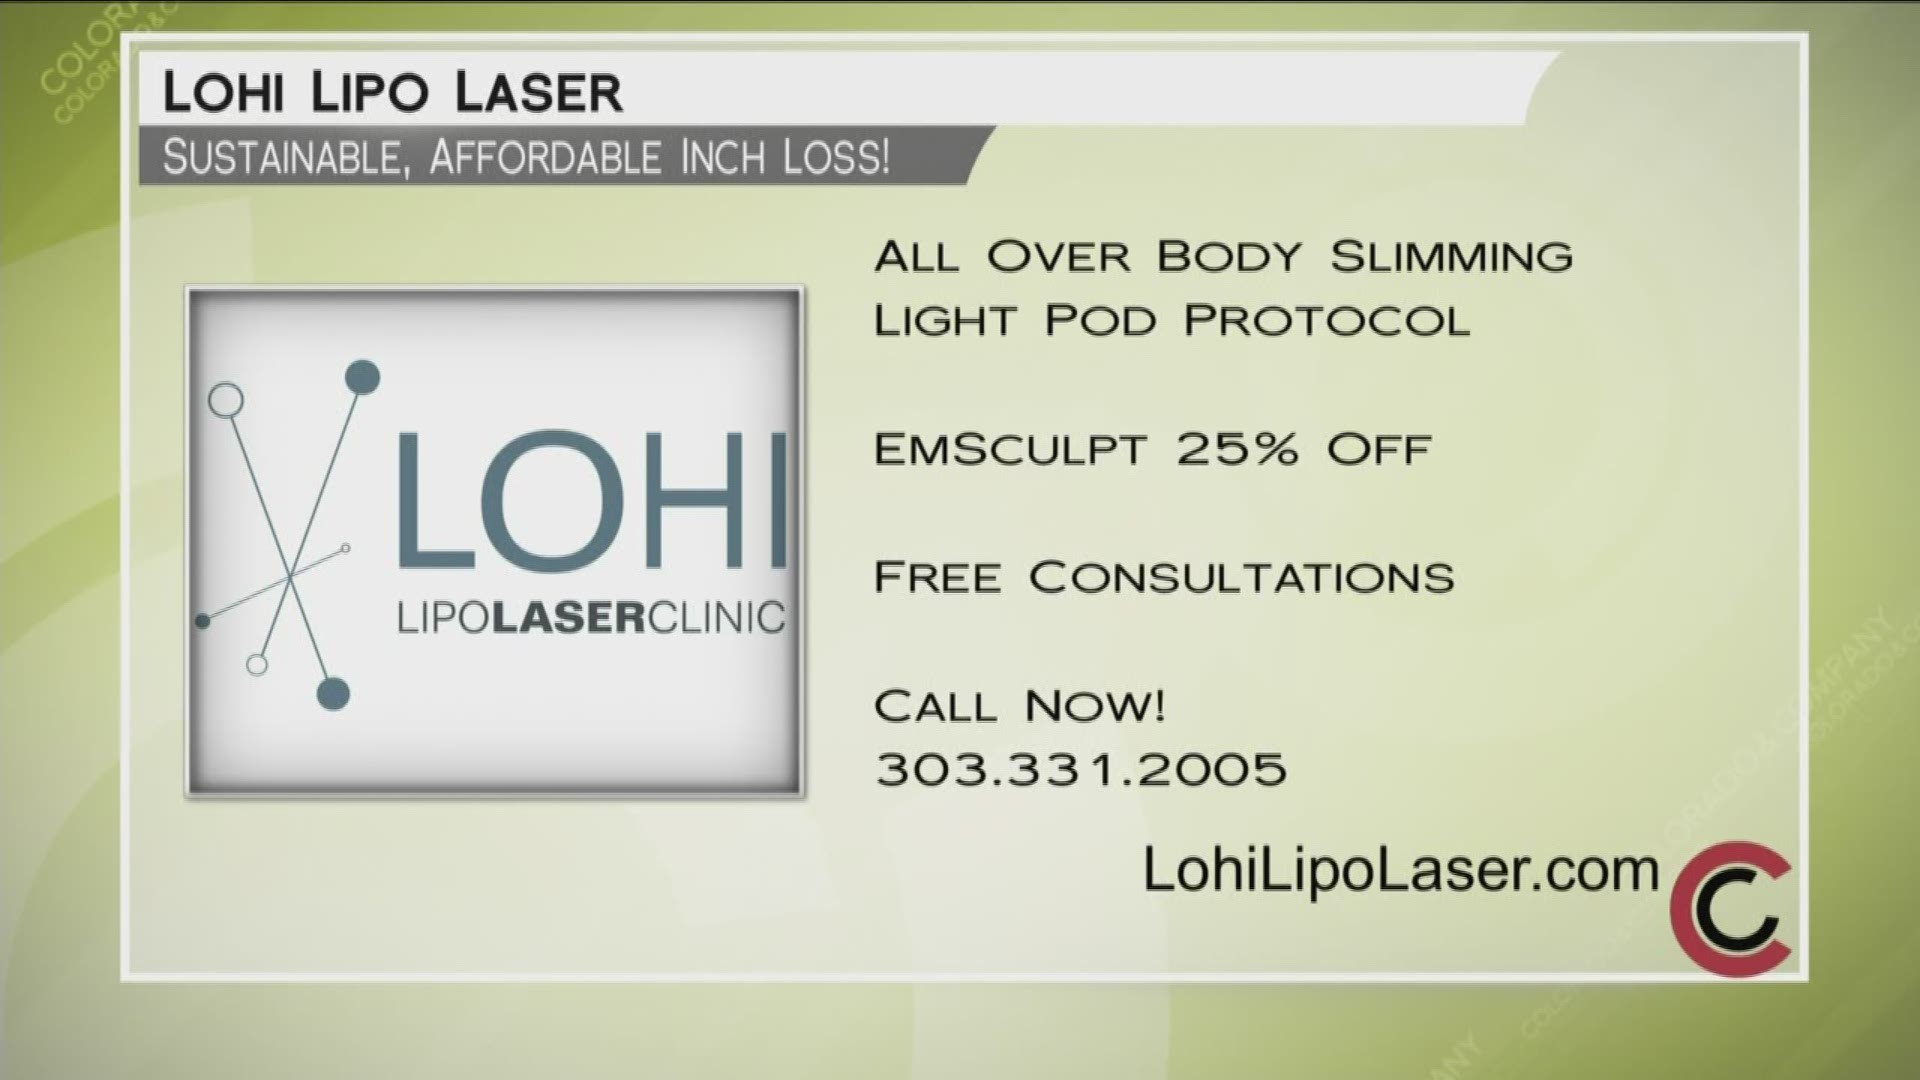 Call Lohi Lipo Laser and try a treatment that's right for you. Learn about their specials and how they can help you at LohiLipoLaser.com or call 303.331.2005.